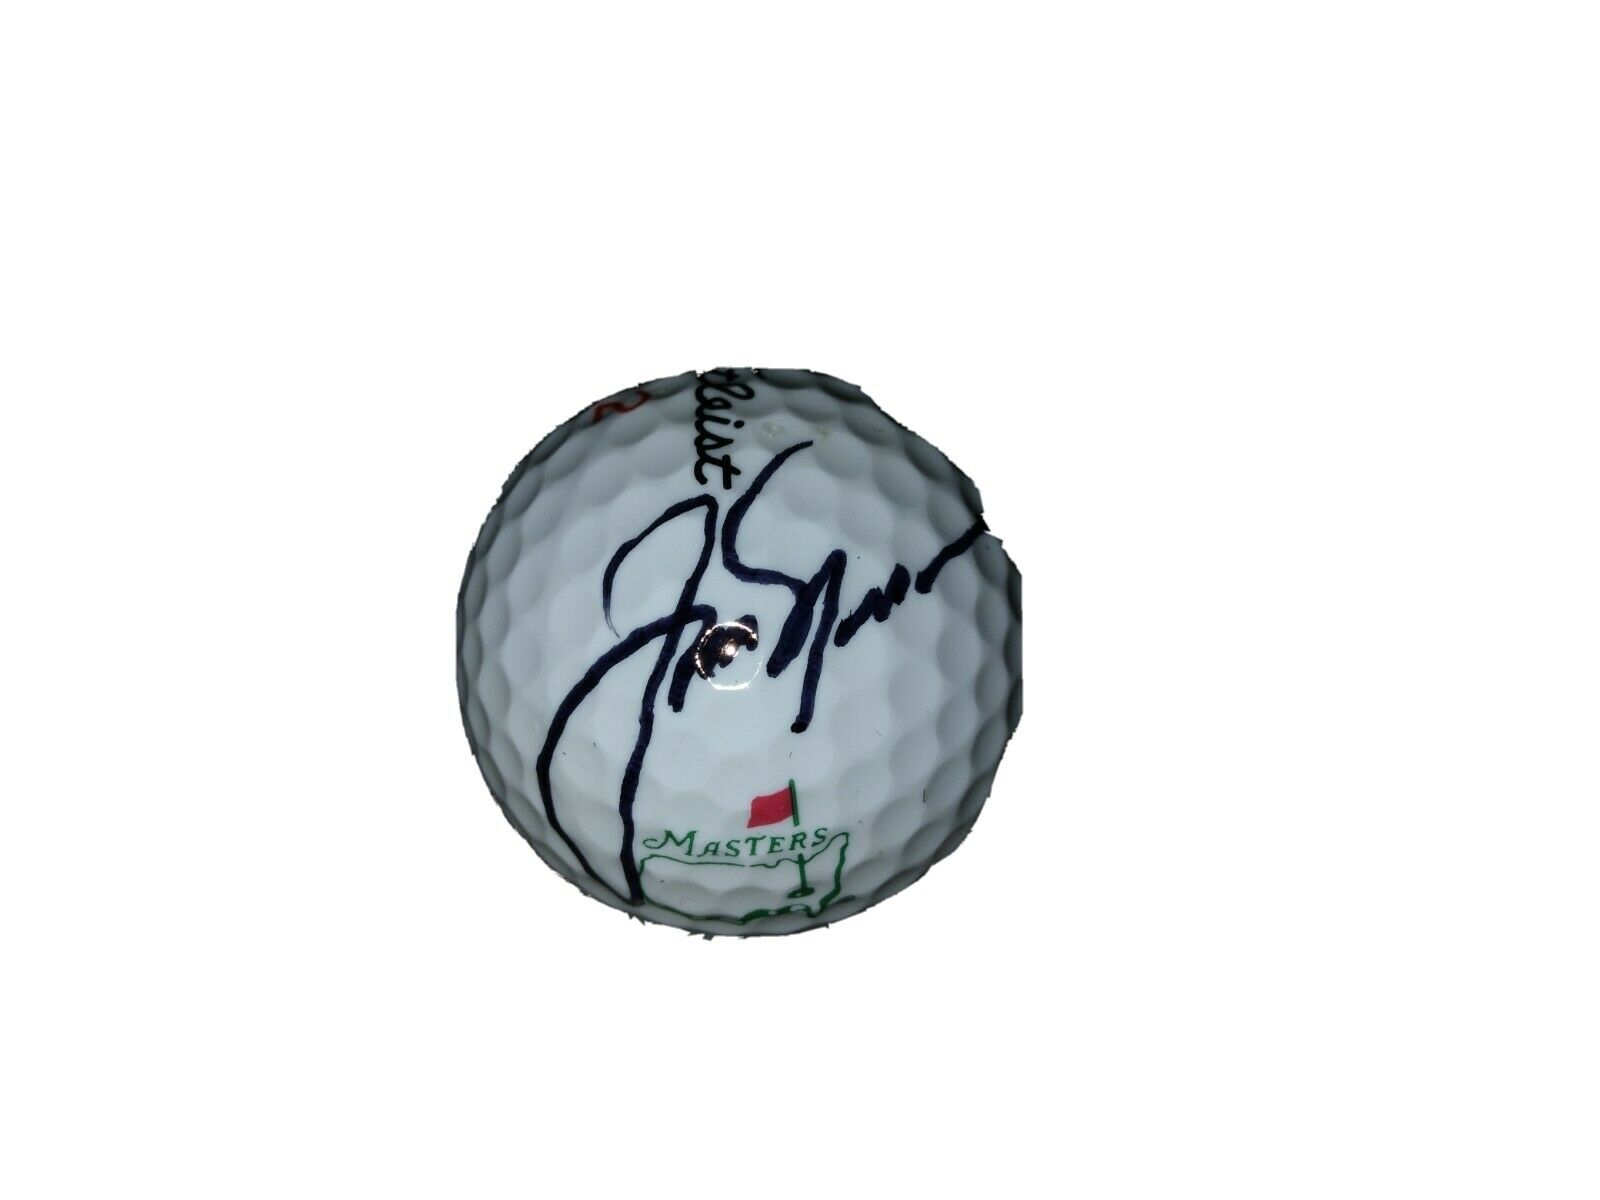 Jack Nicklaus Pga Super Star Autographed Masters Golf Ball Authentic